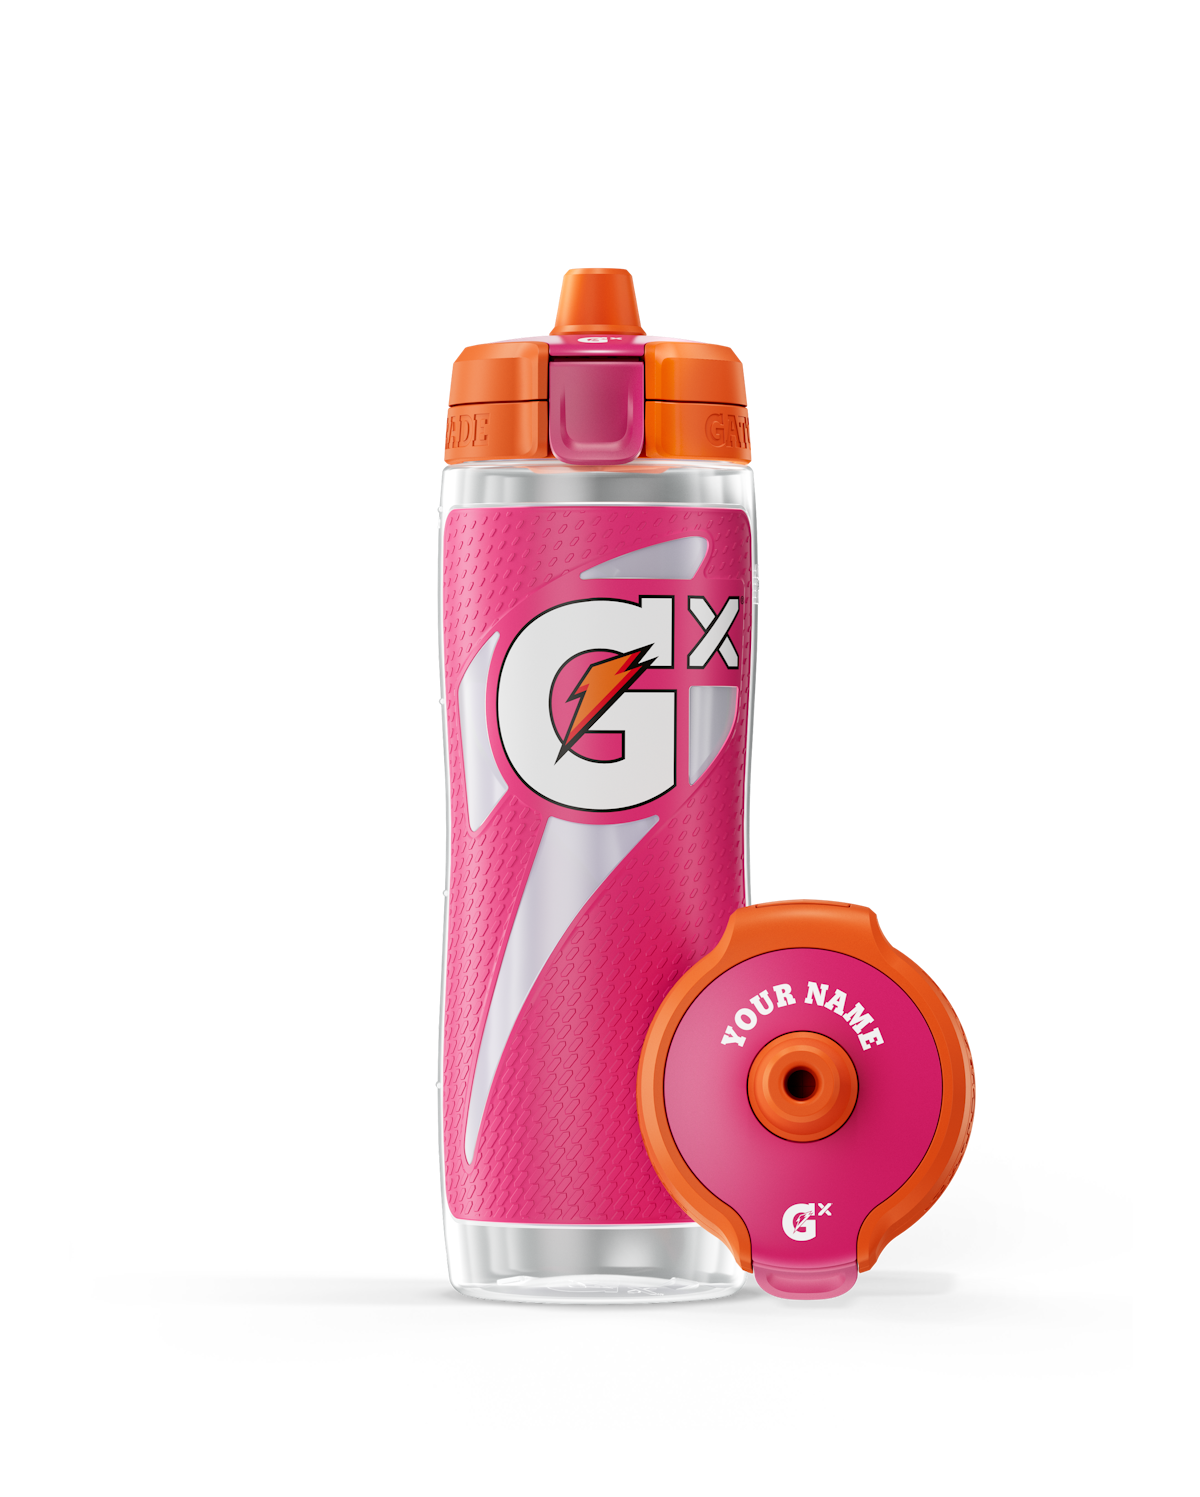 https://www.datocms-assets.com/101859/1691708769-00052000045802_gxsqueezebottle_pink_producttile_2680x3344.png?auto=format&fit=fill&w=1200&ar=16%3A9&fill=solid